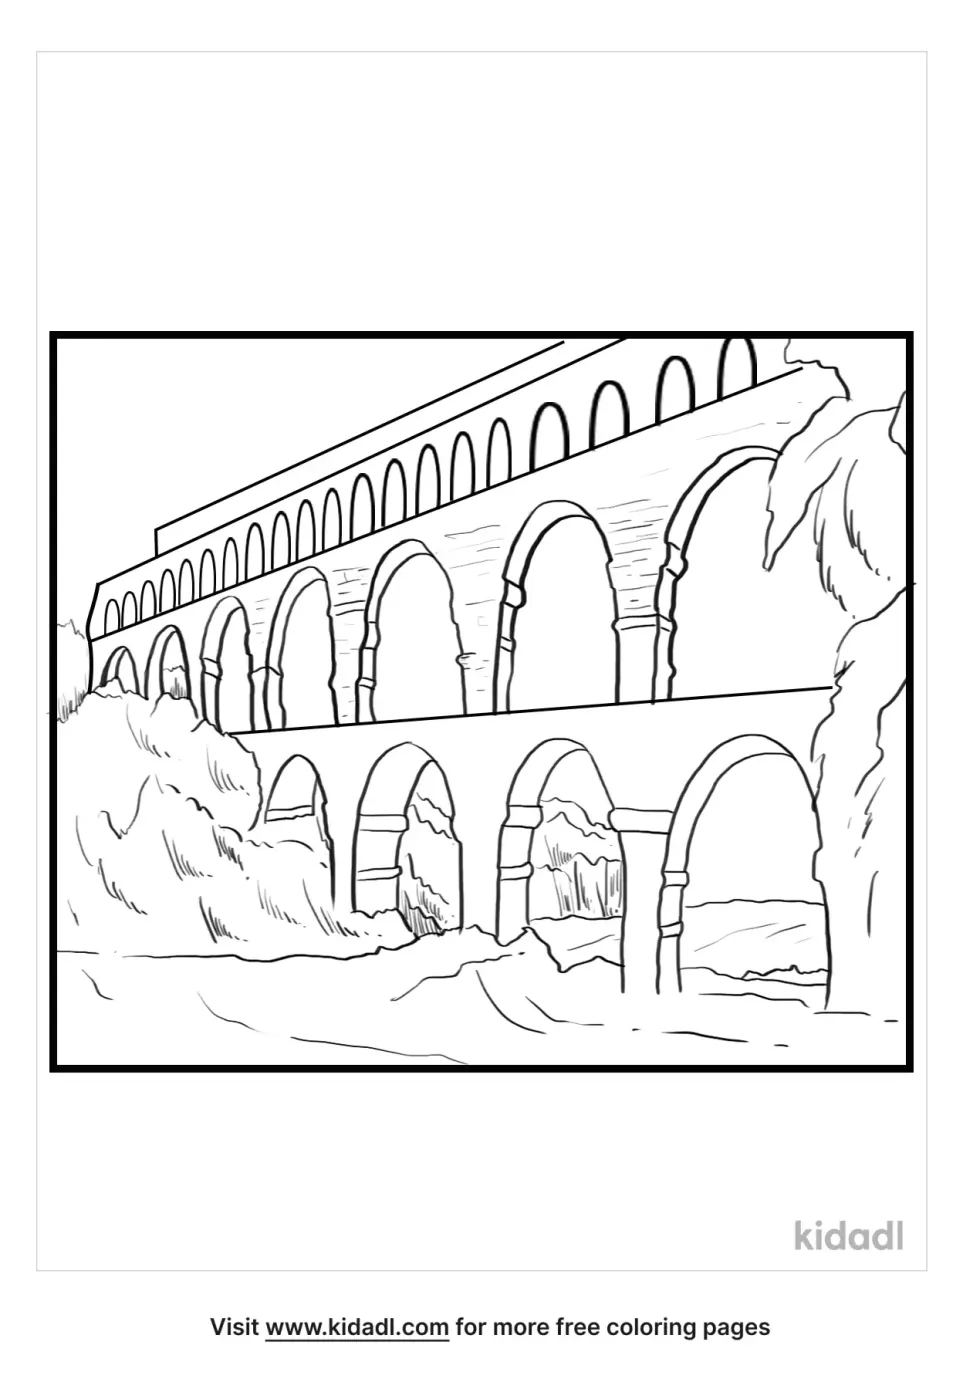 The Aqueducts Coloring Page